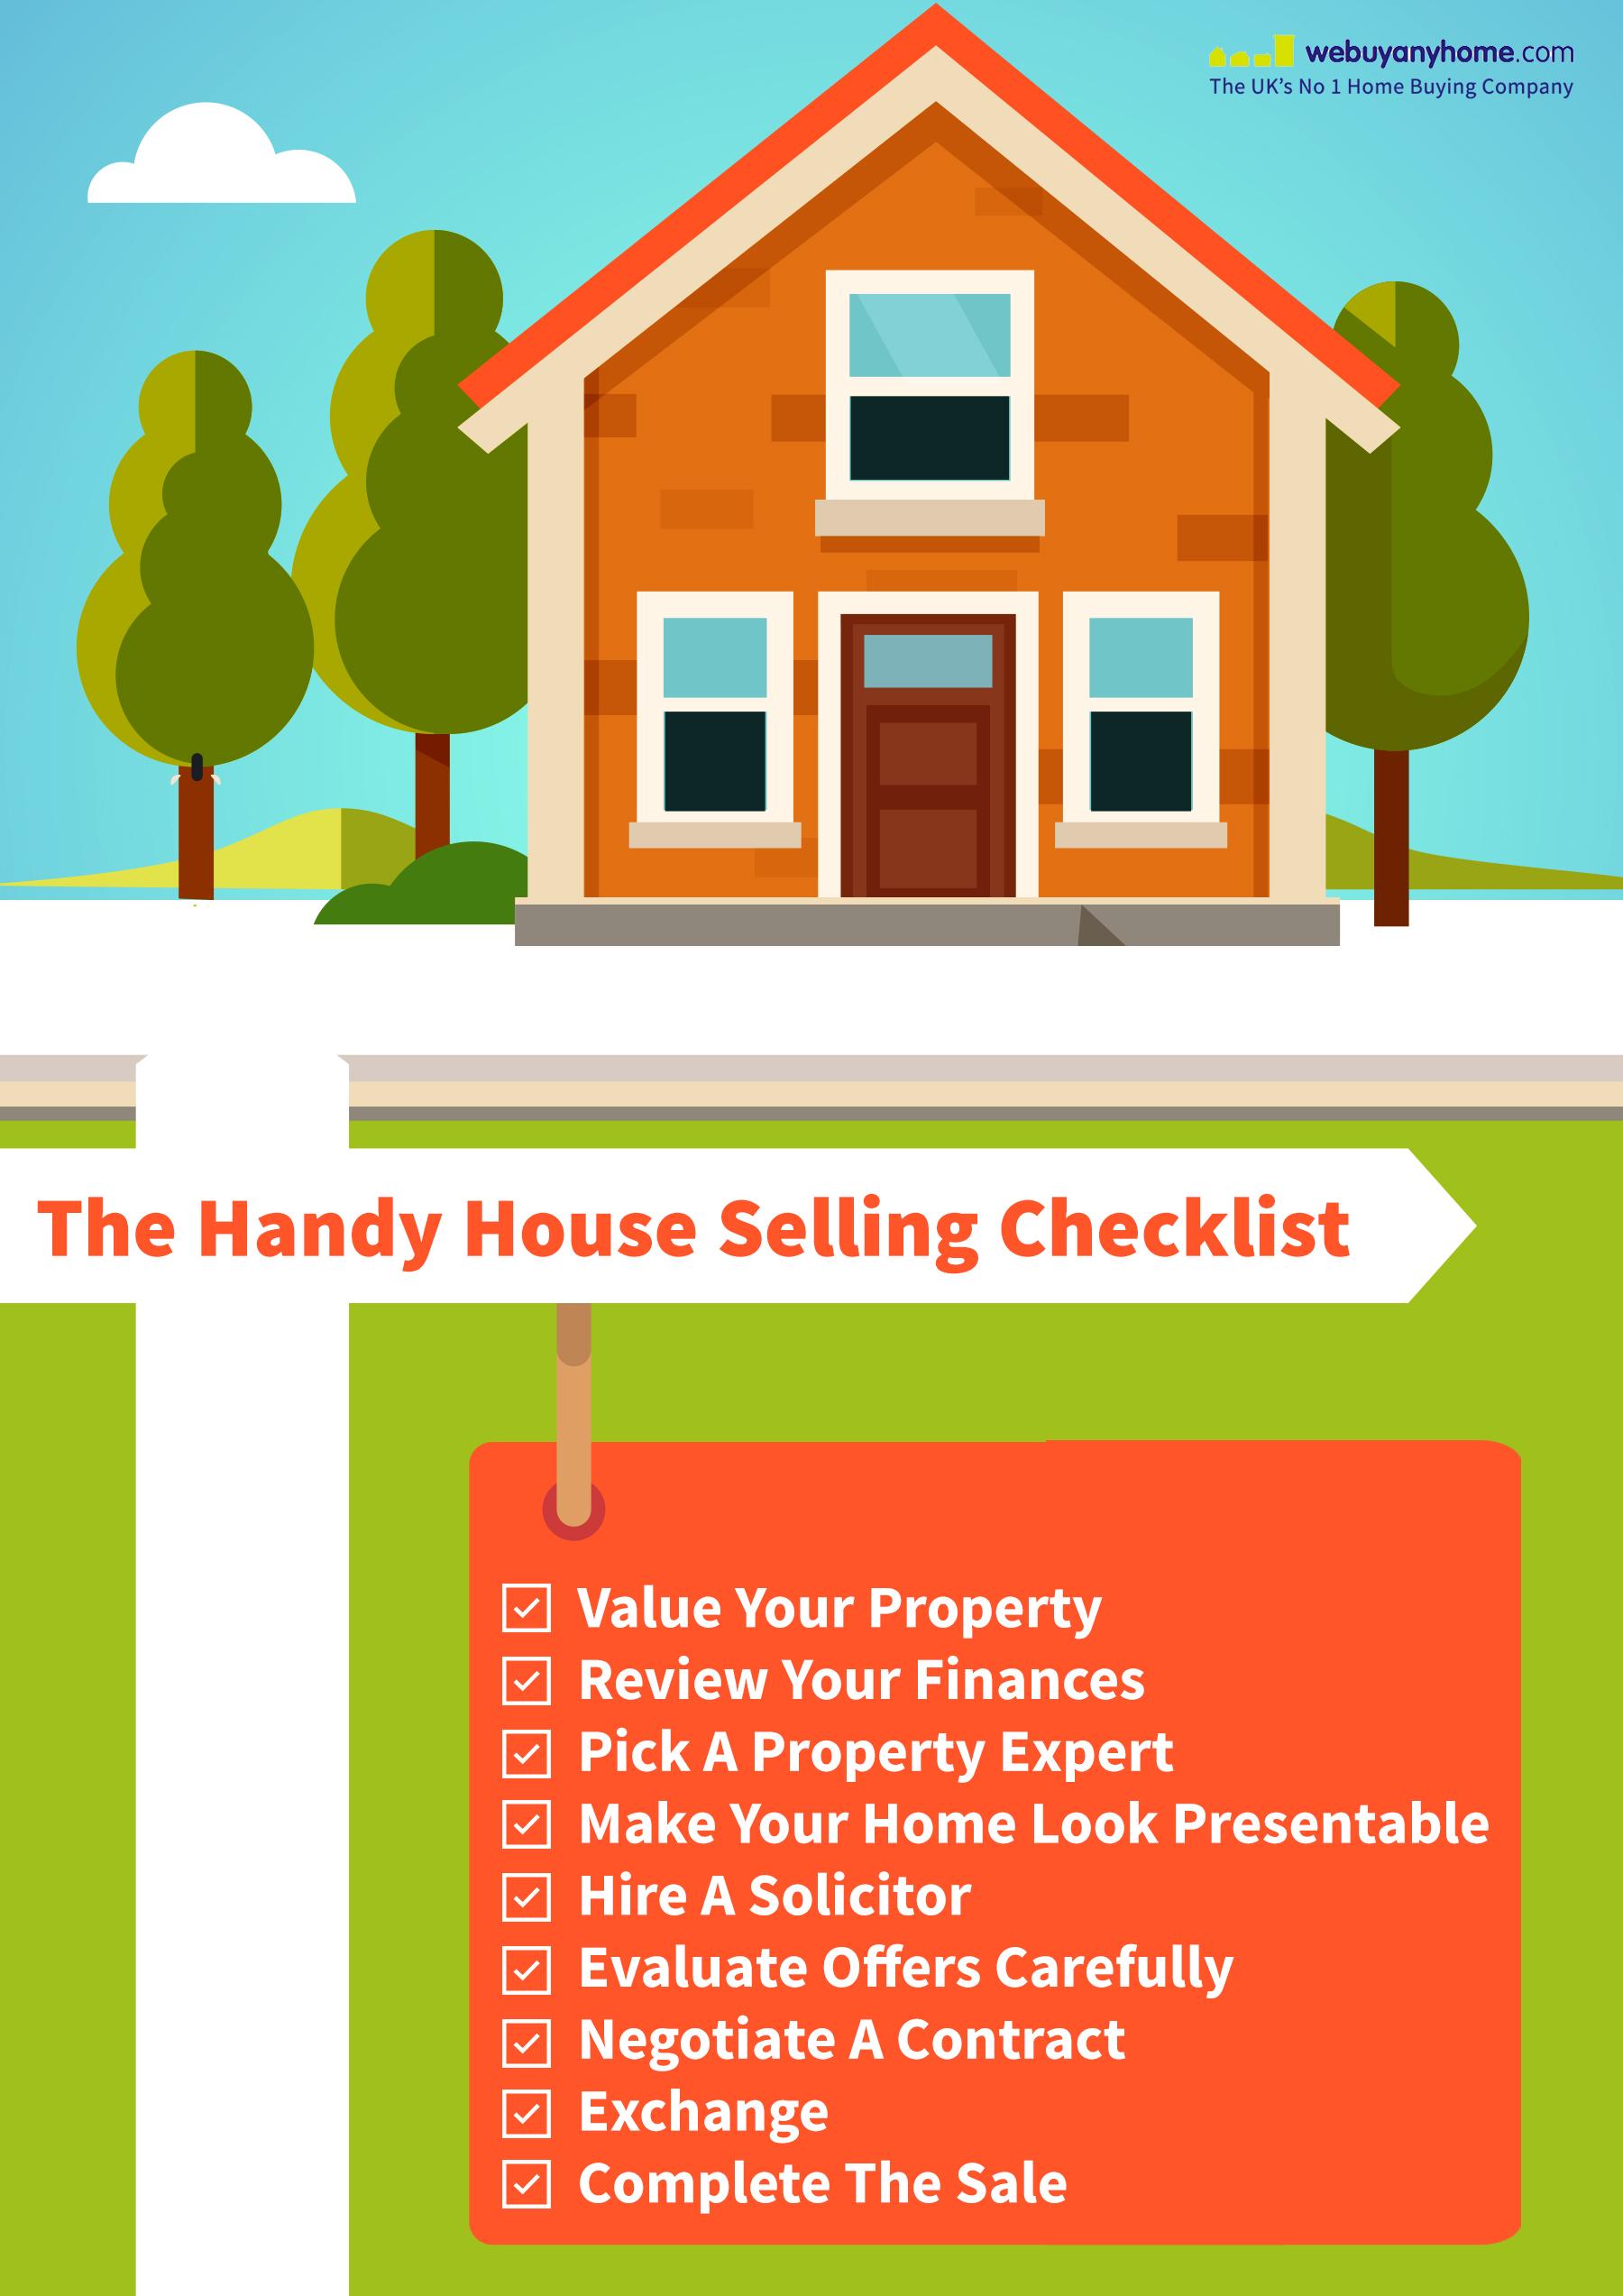 Handy House Selling Checklist, We Buy Any Home